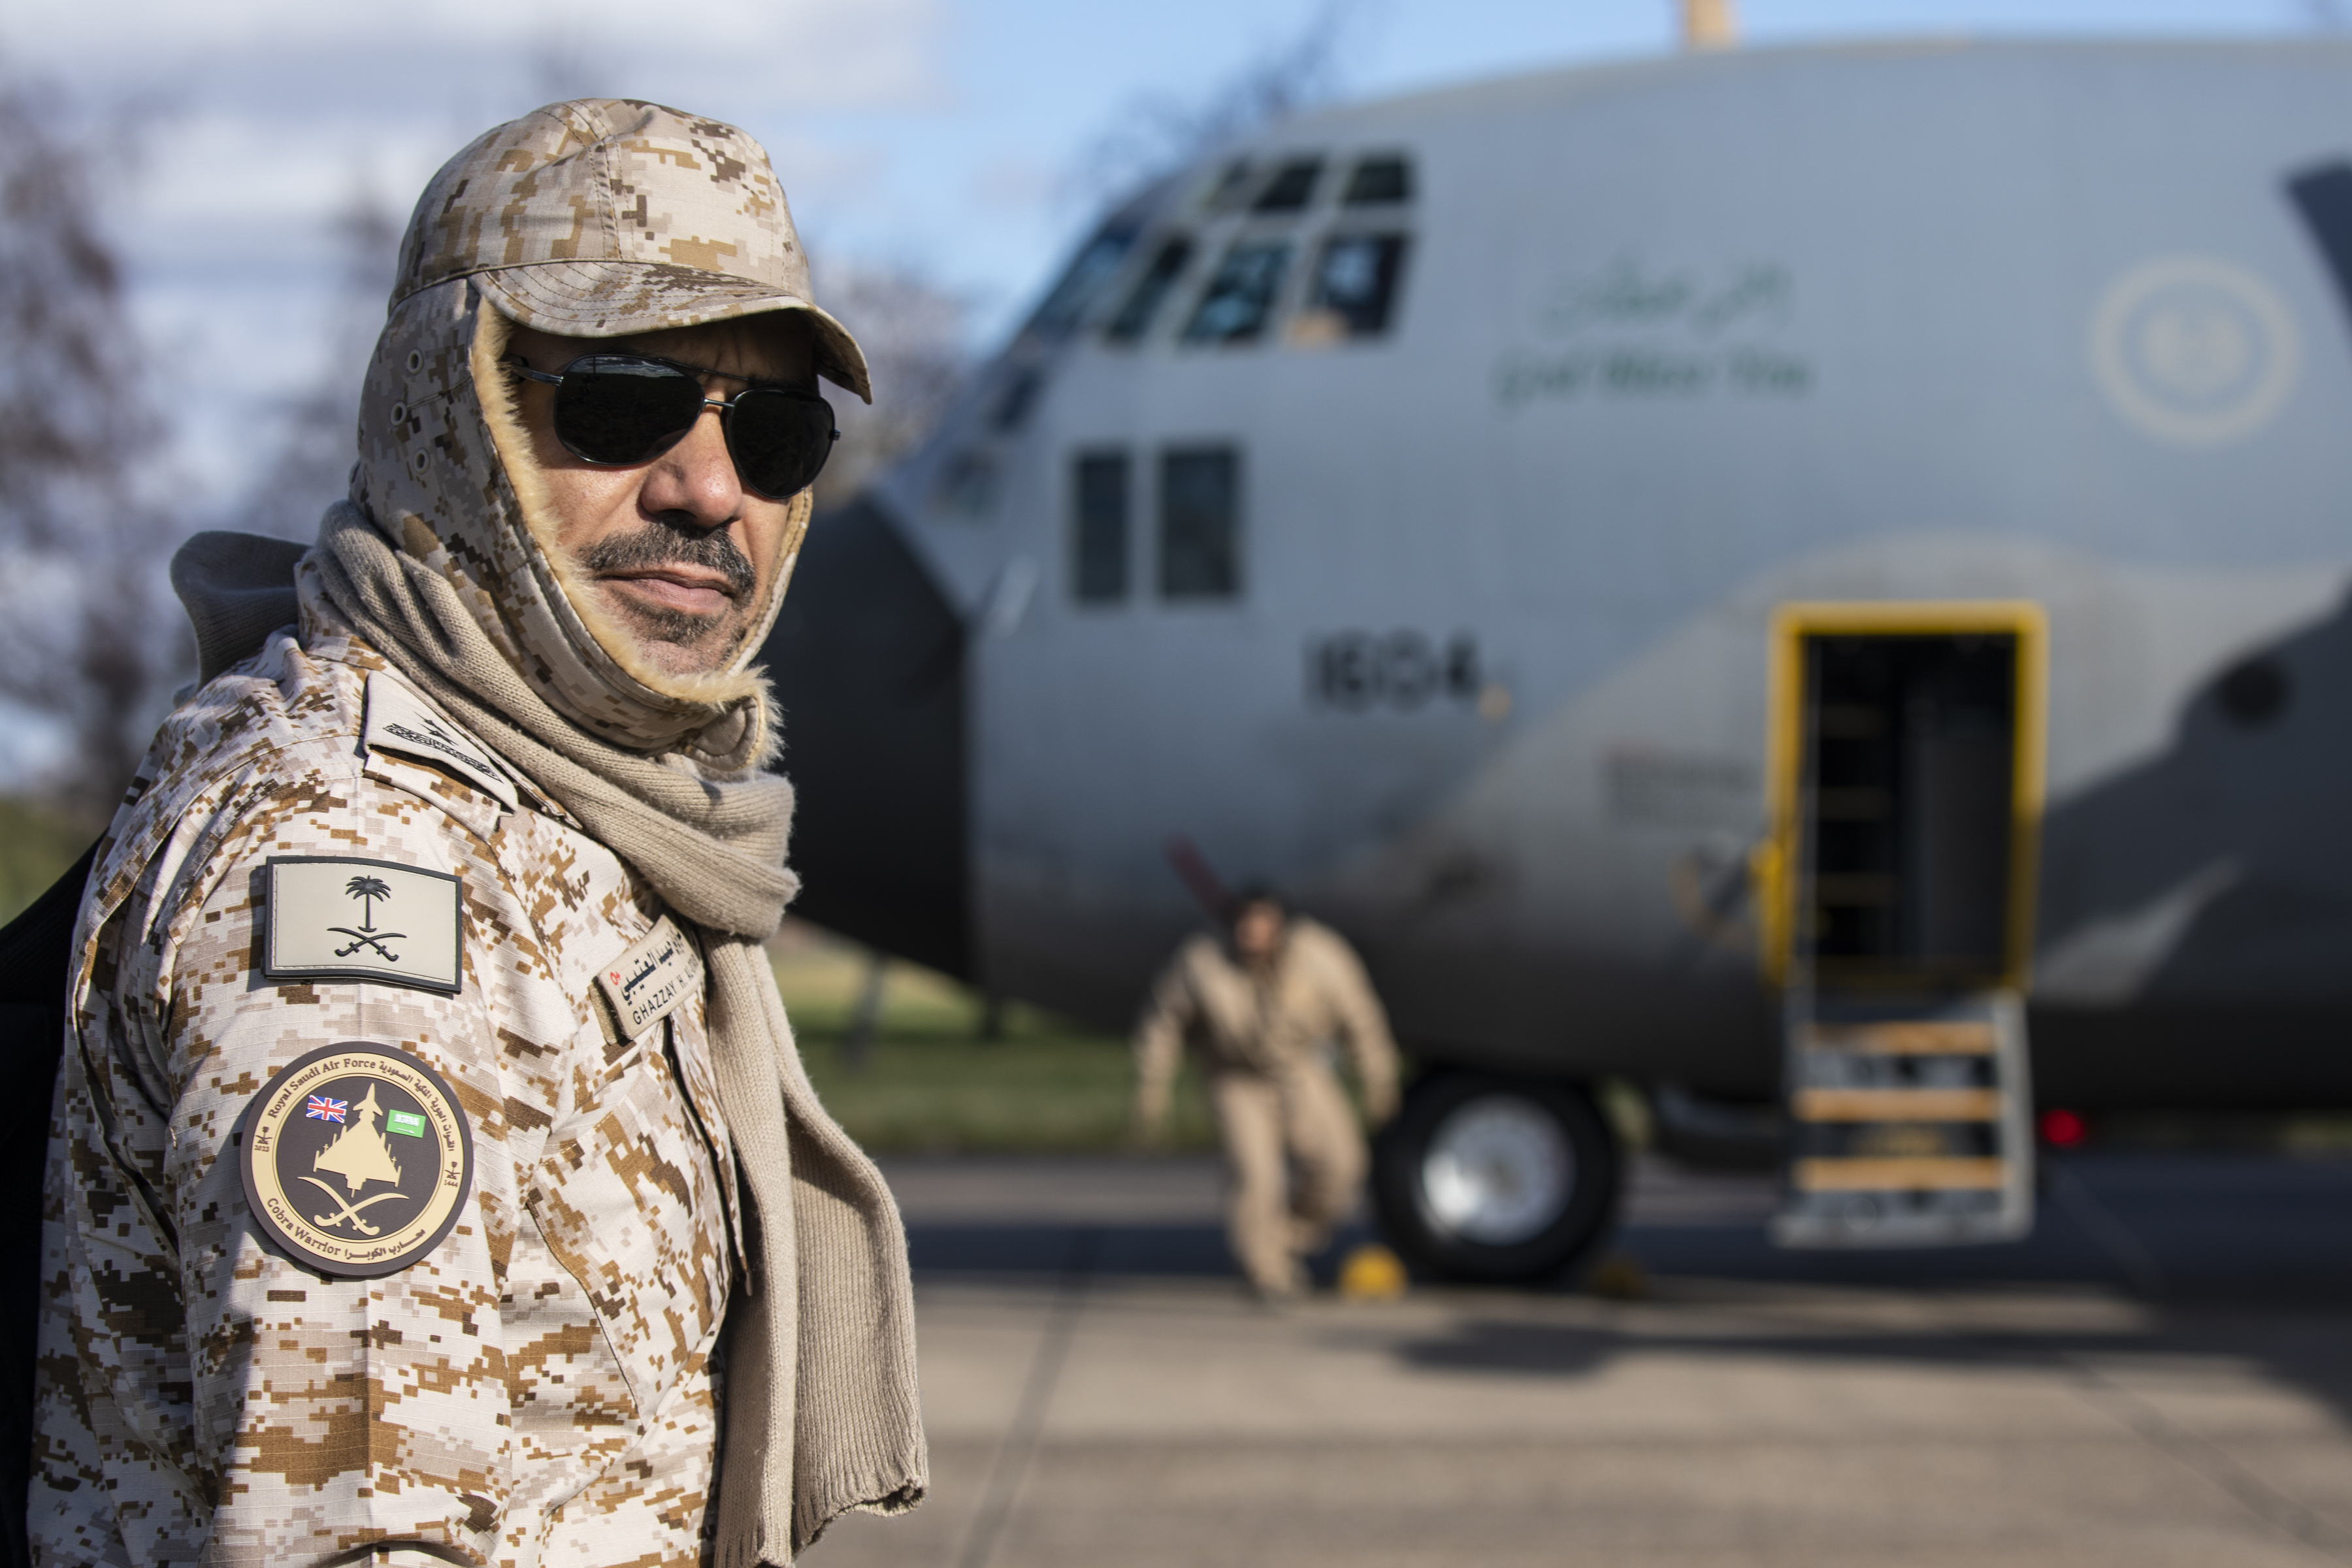 Image shows Joint RAF Qatari personnel on the airfield, with the RAF Voyager in the background.